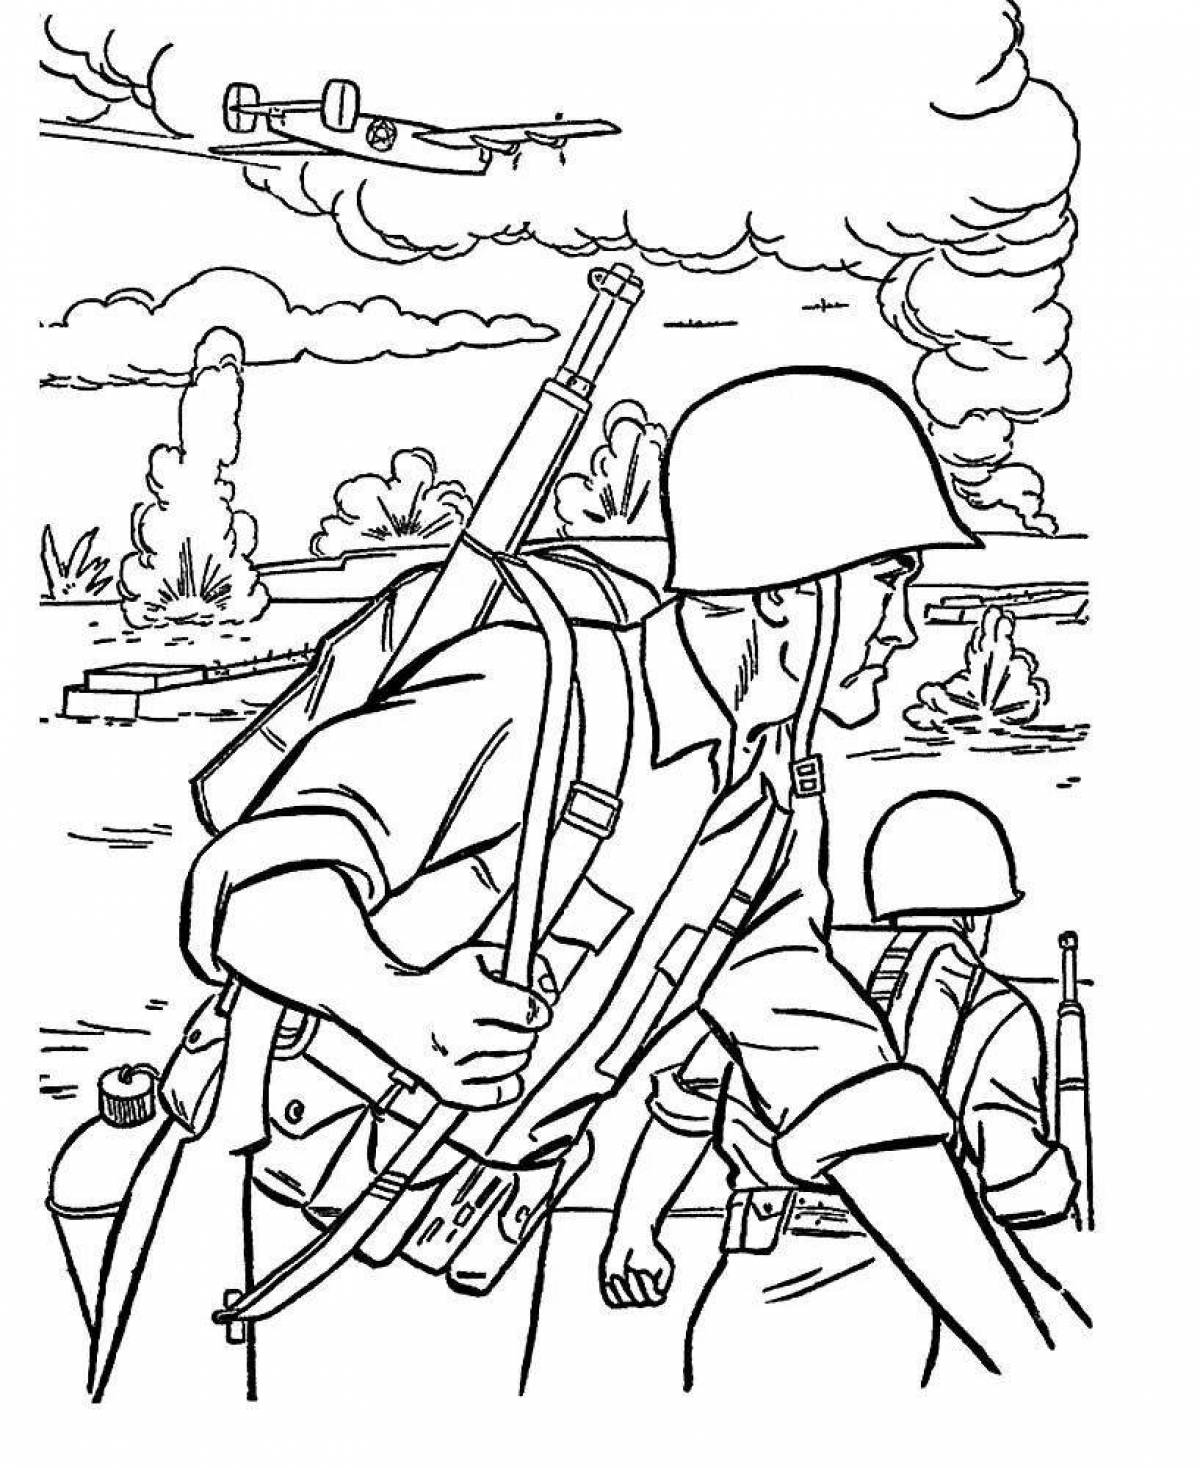 Fun military coloring for children